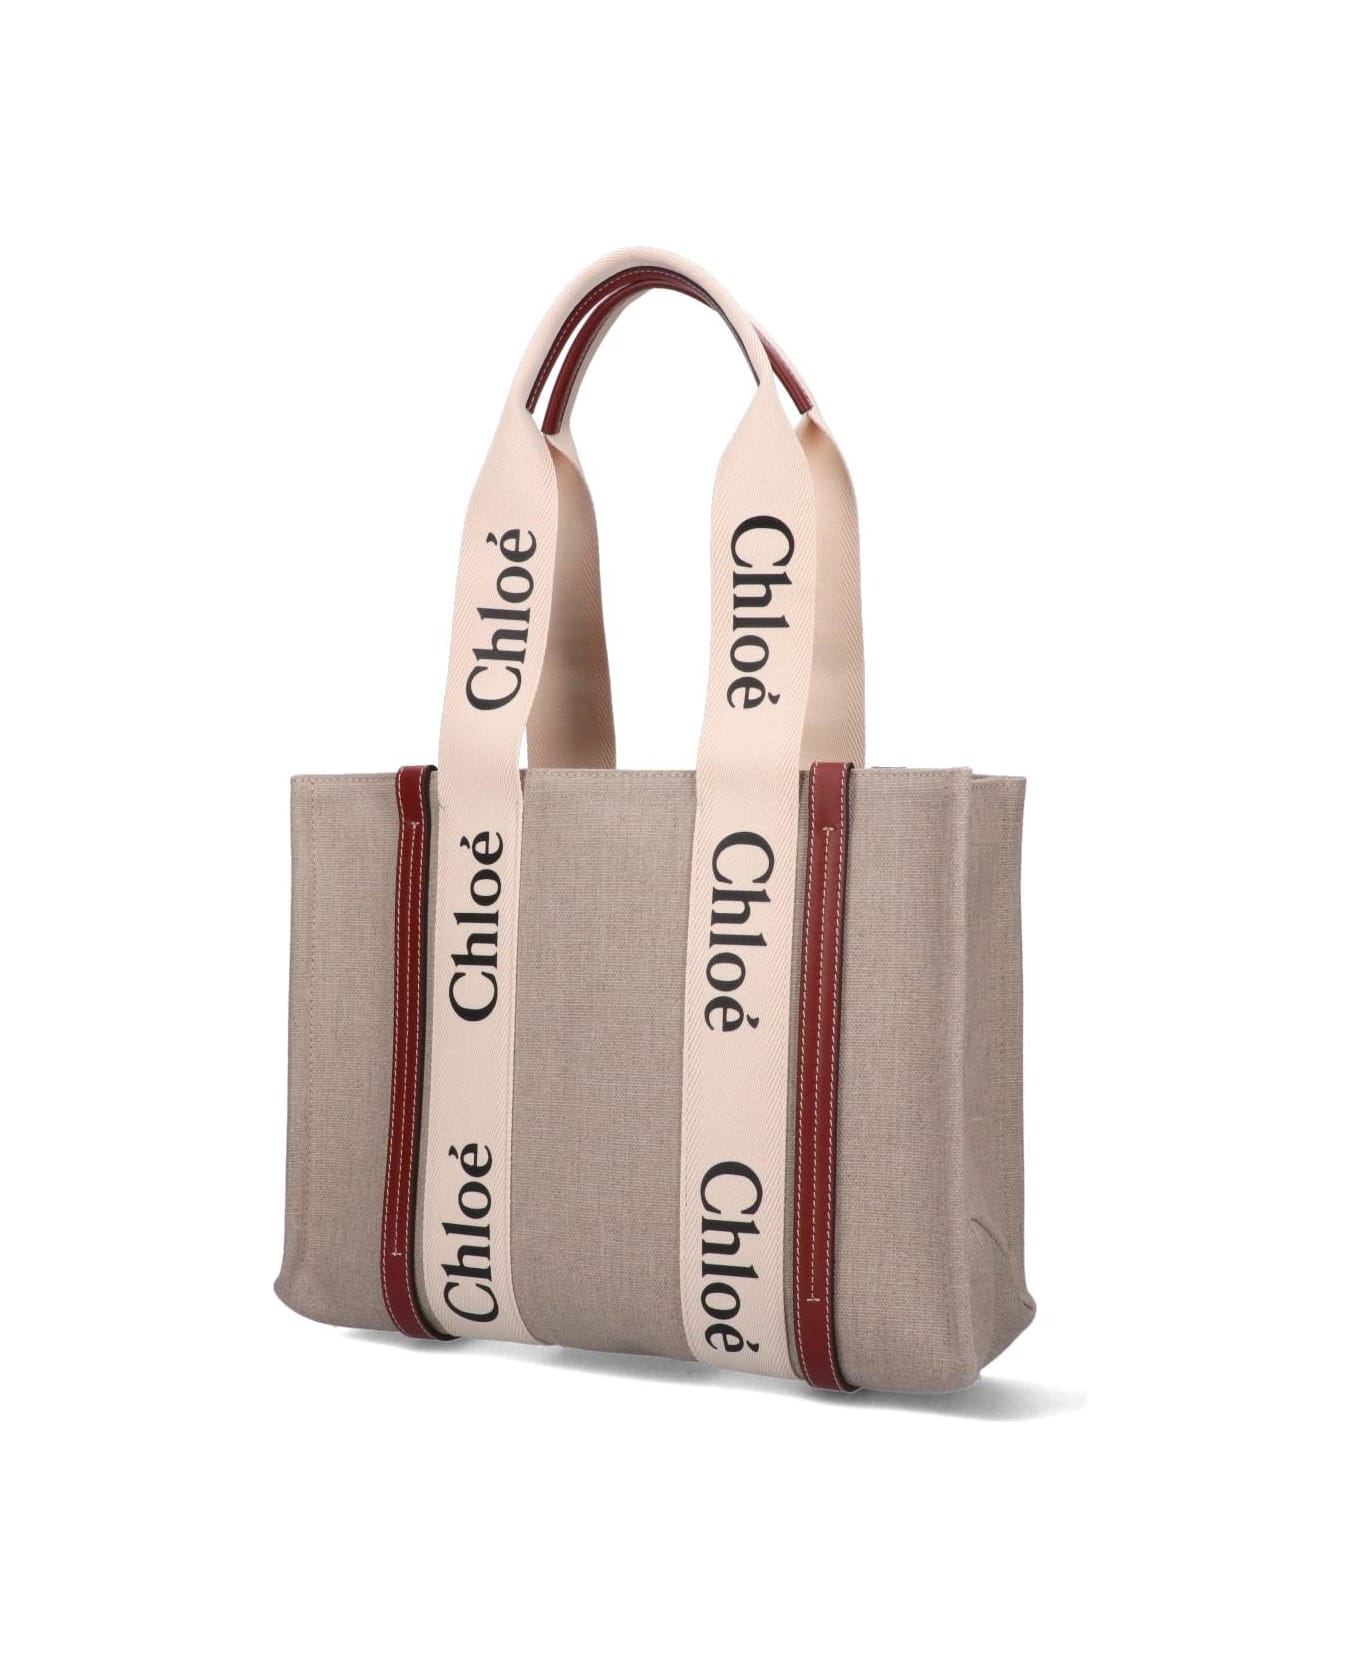 Chloé White And Brown Medium Woody Shopping Bag With Shoulder Strap - Marrone トートバッグ